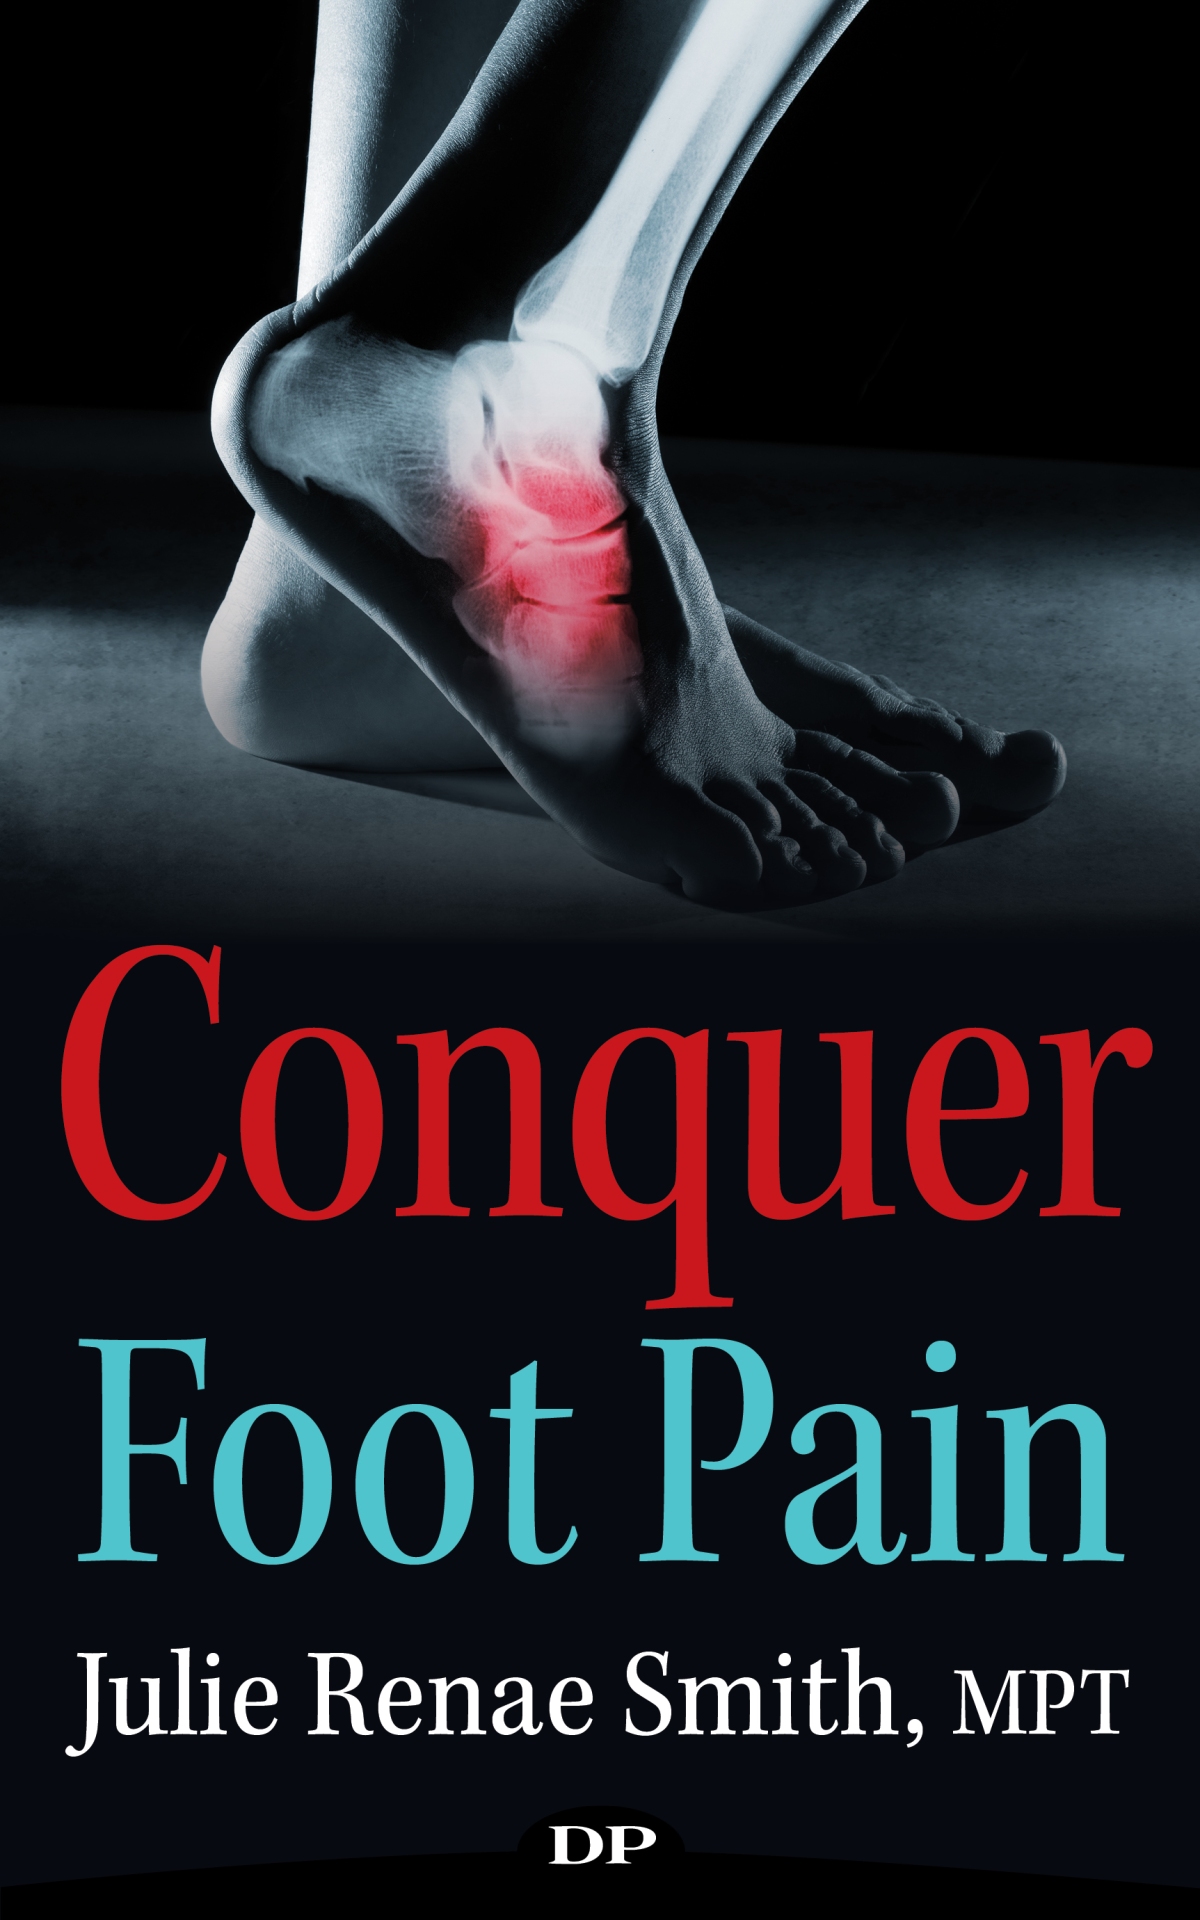 Conquer Foot Pain by Julie Renae Smith, MPT